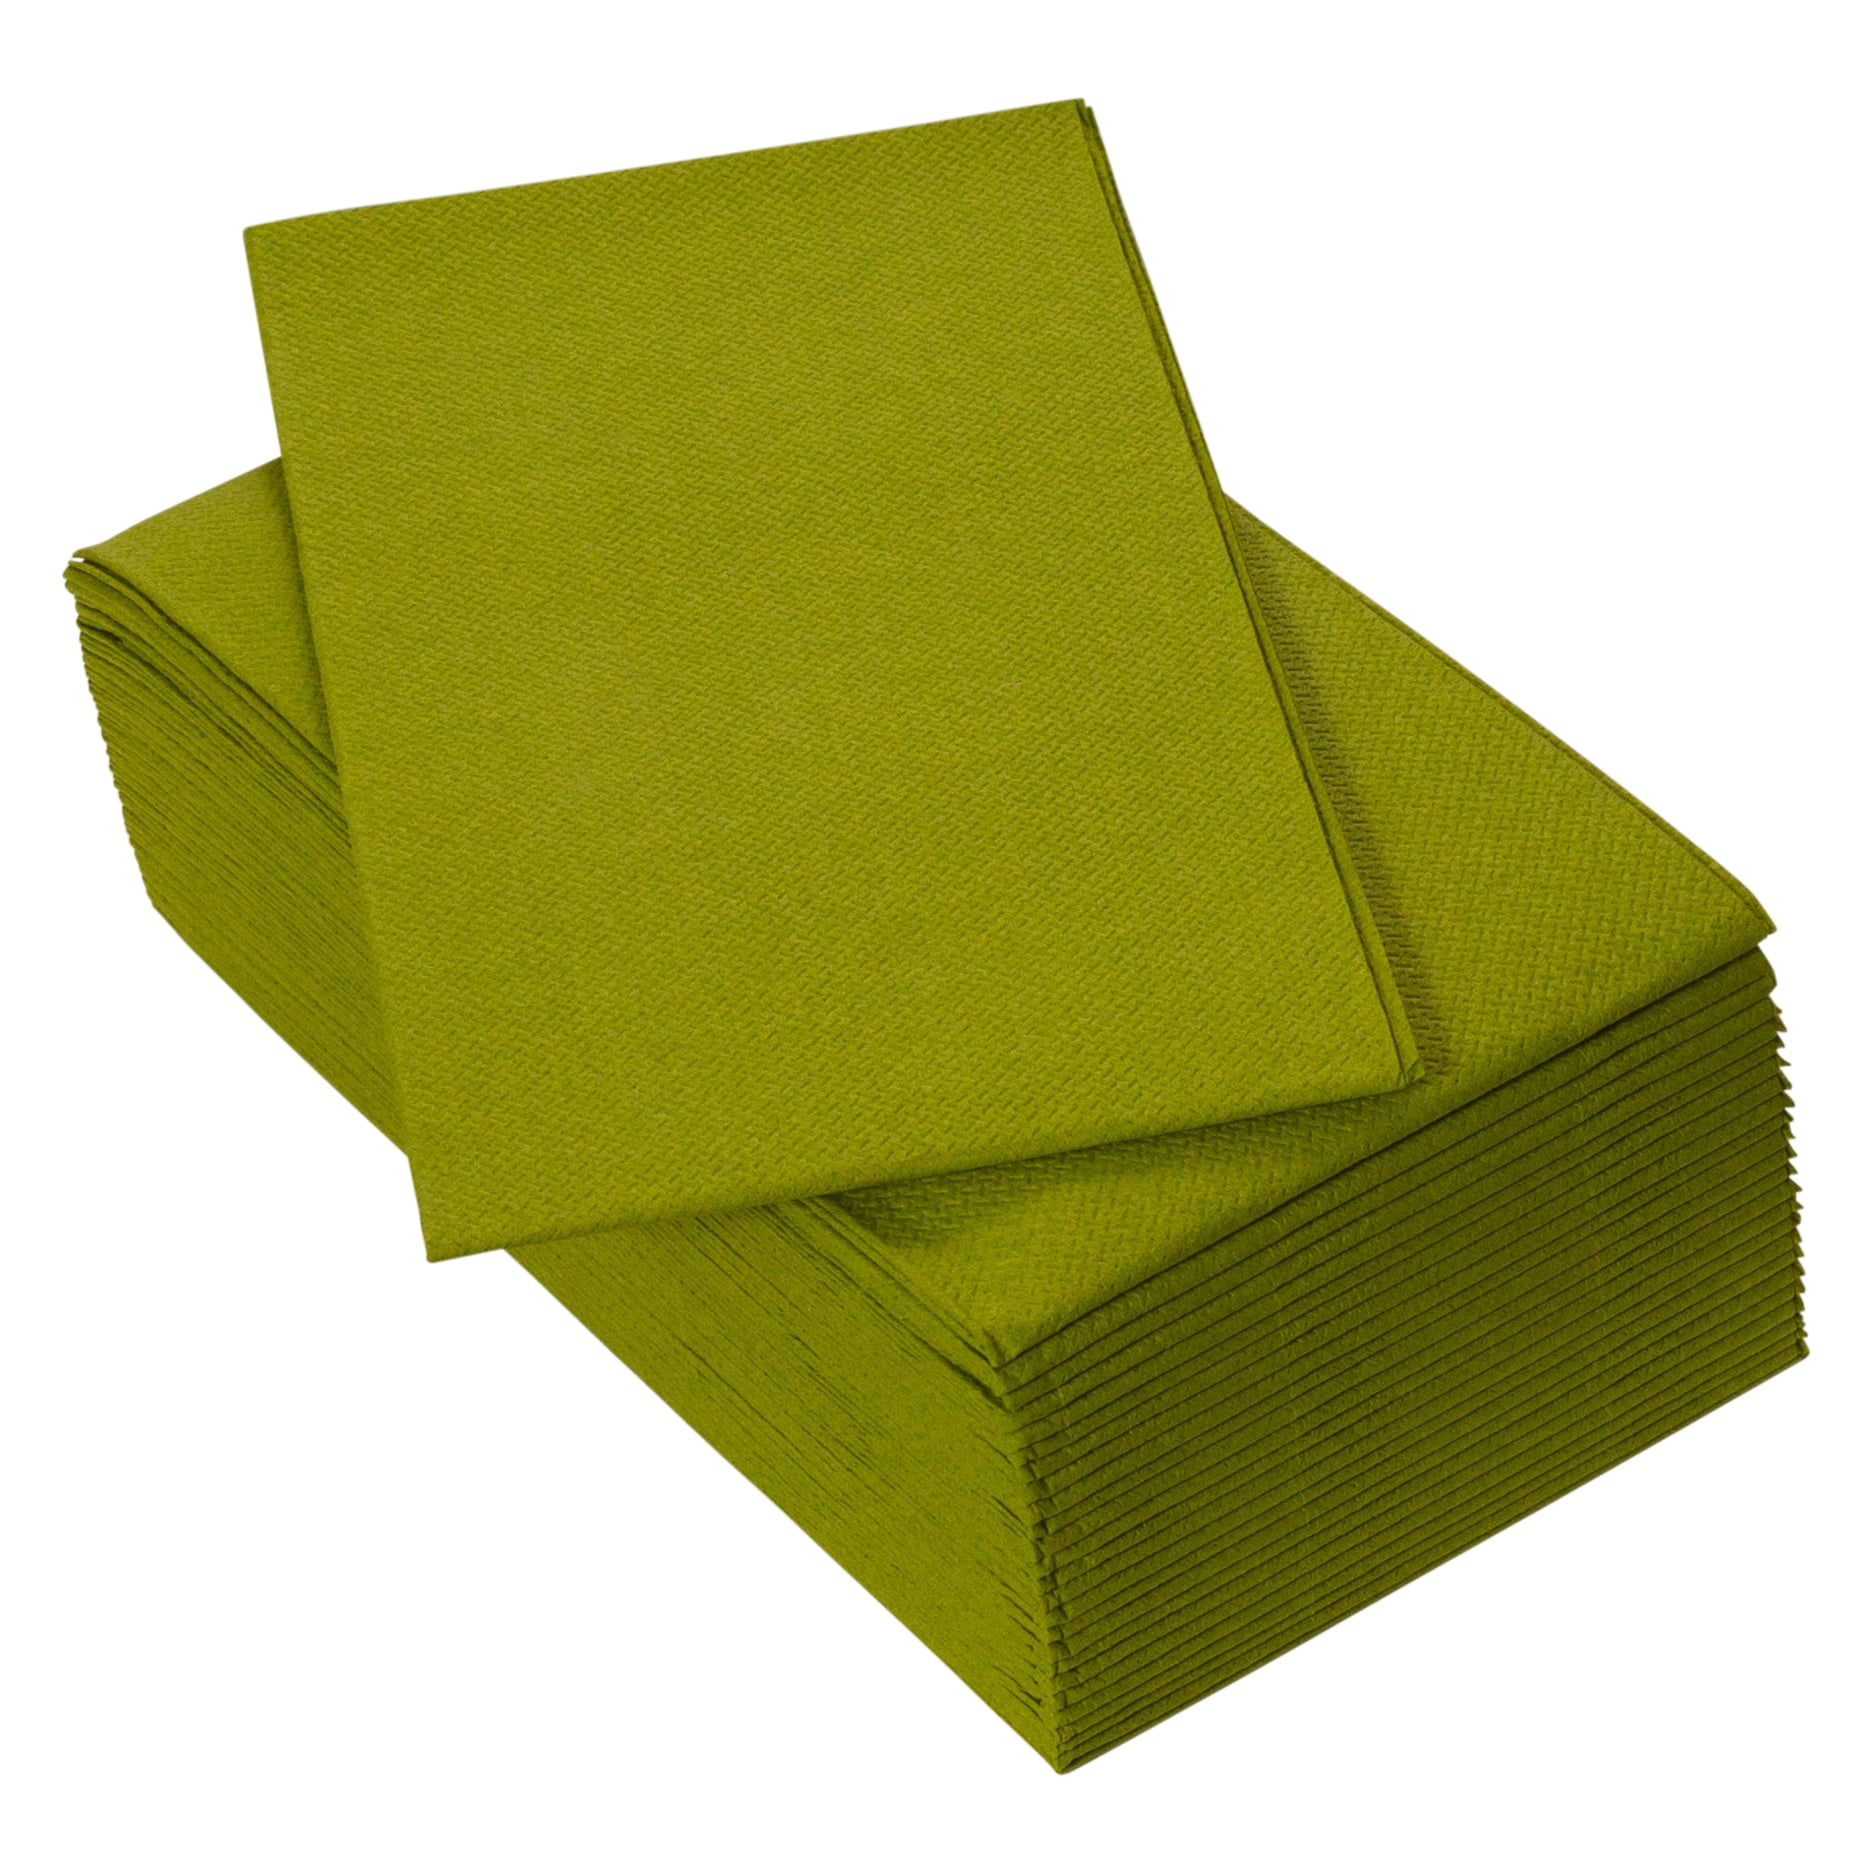  Disposable Guest Towels/Dinner Napkins - 100 Pack